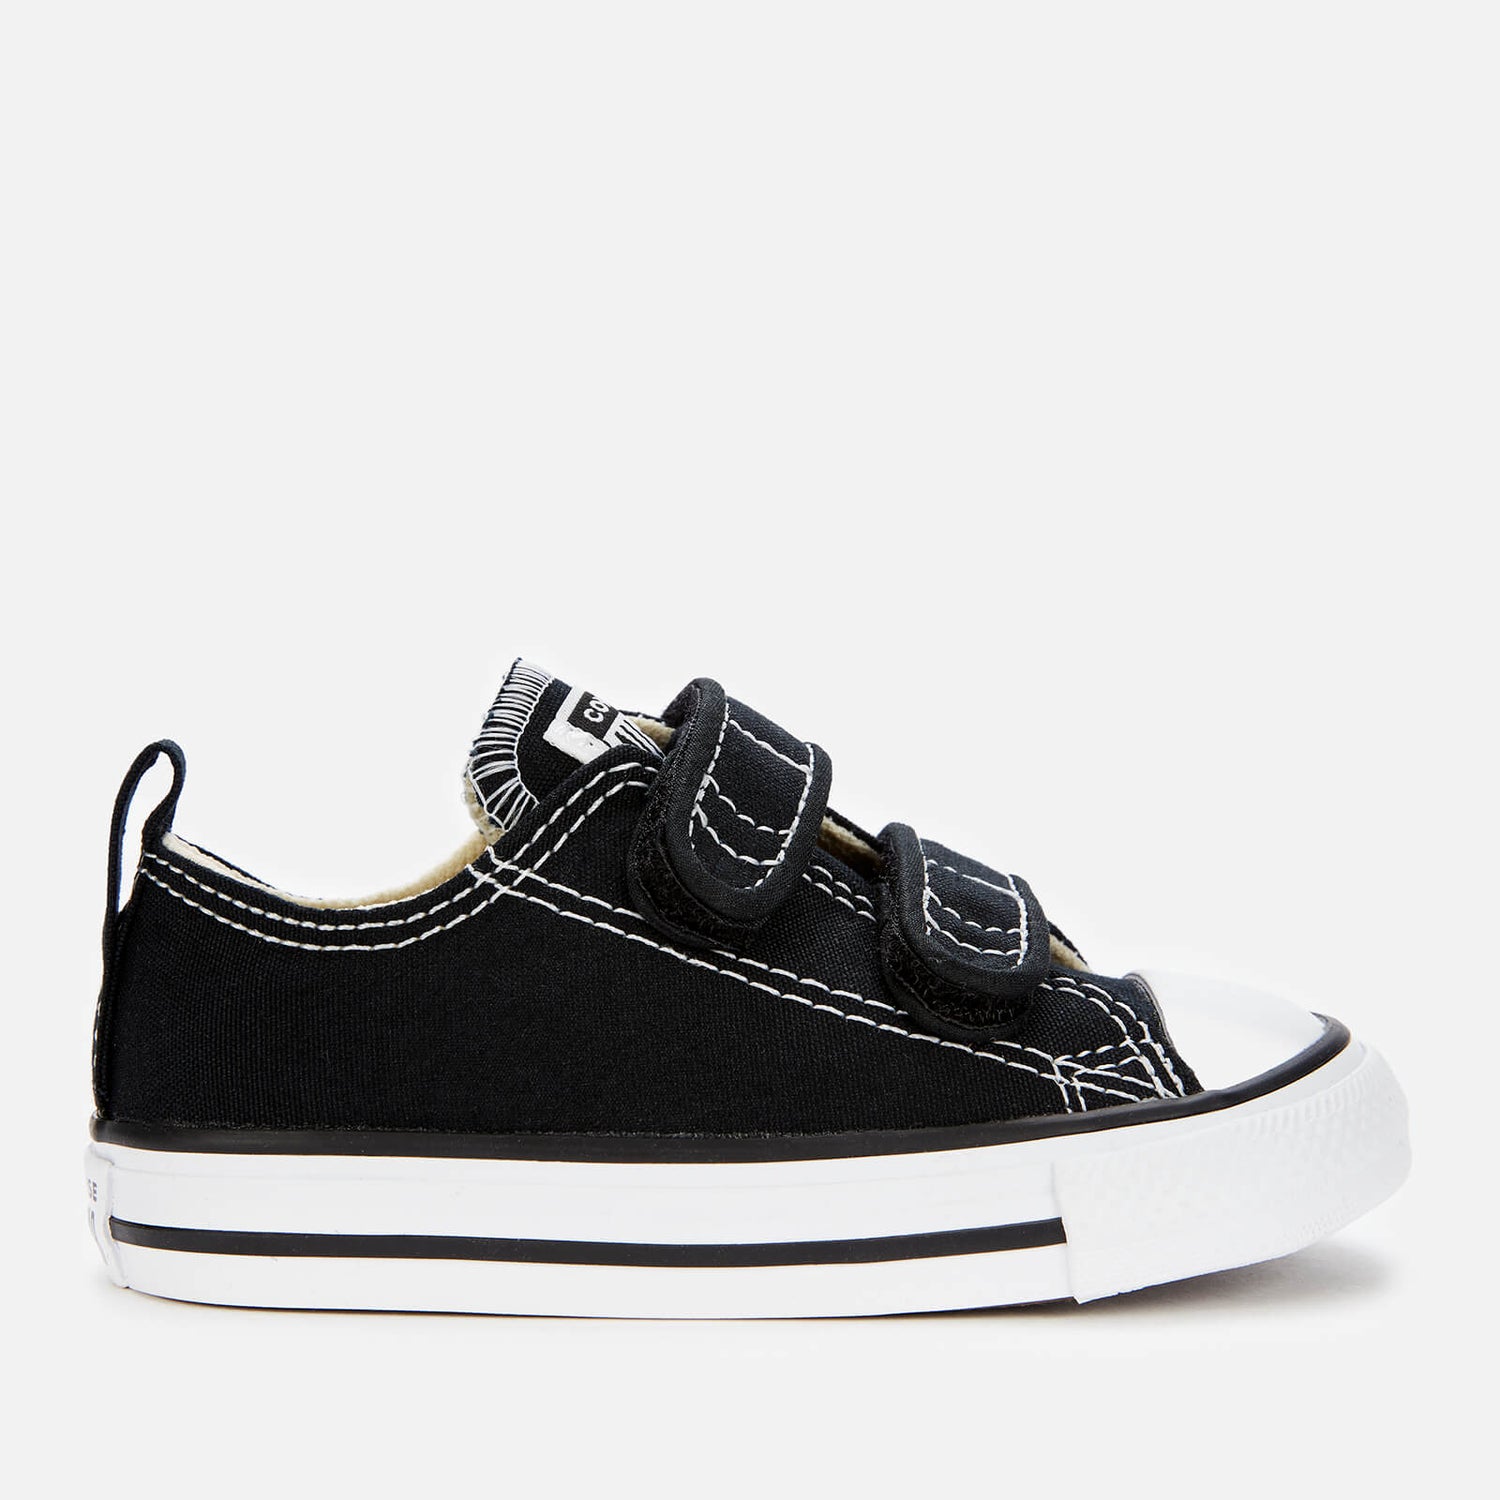 Converse Toddlers' Chuck Taylor All Star Ox Velcro Trainers - Black